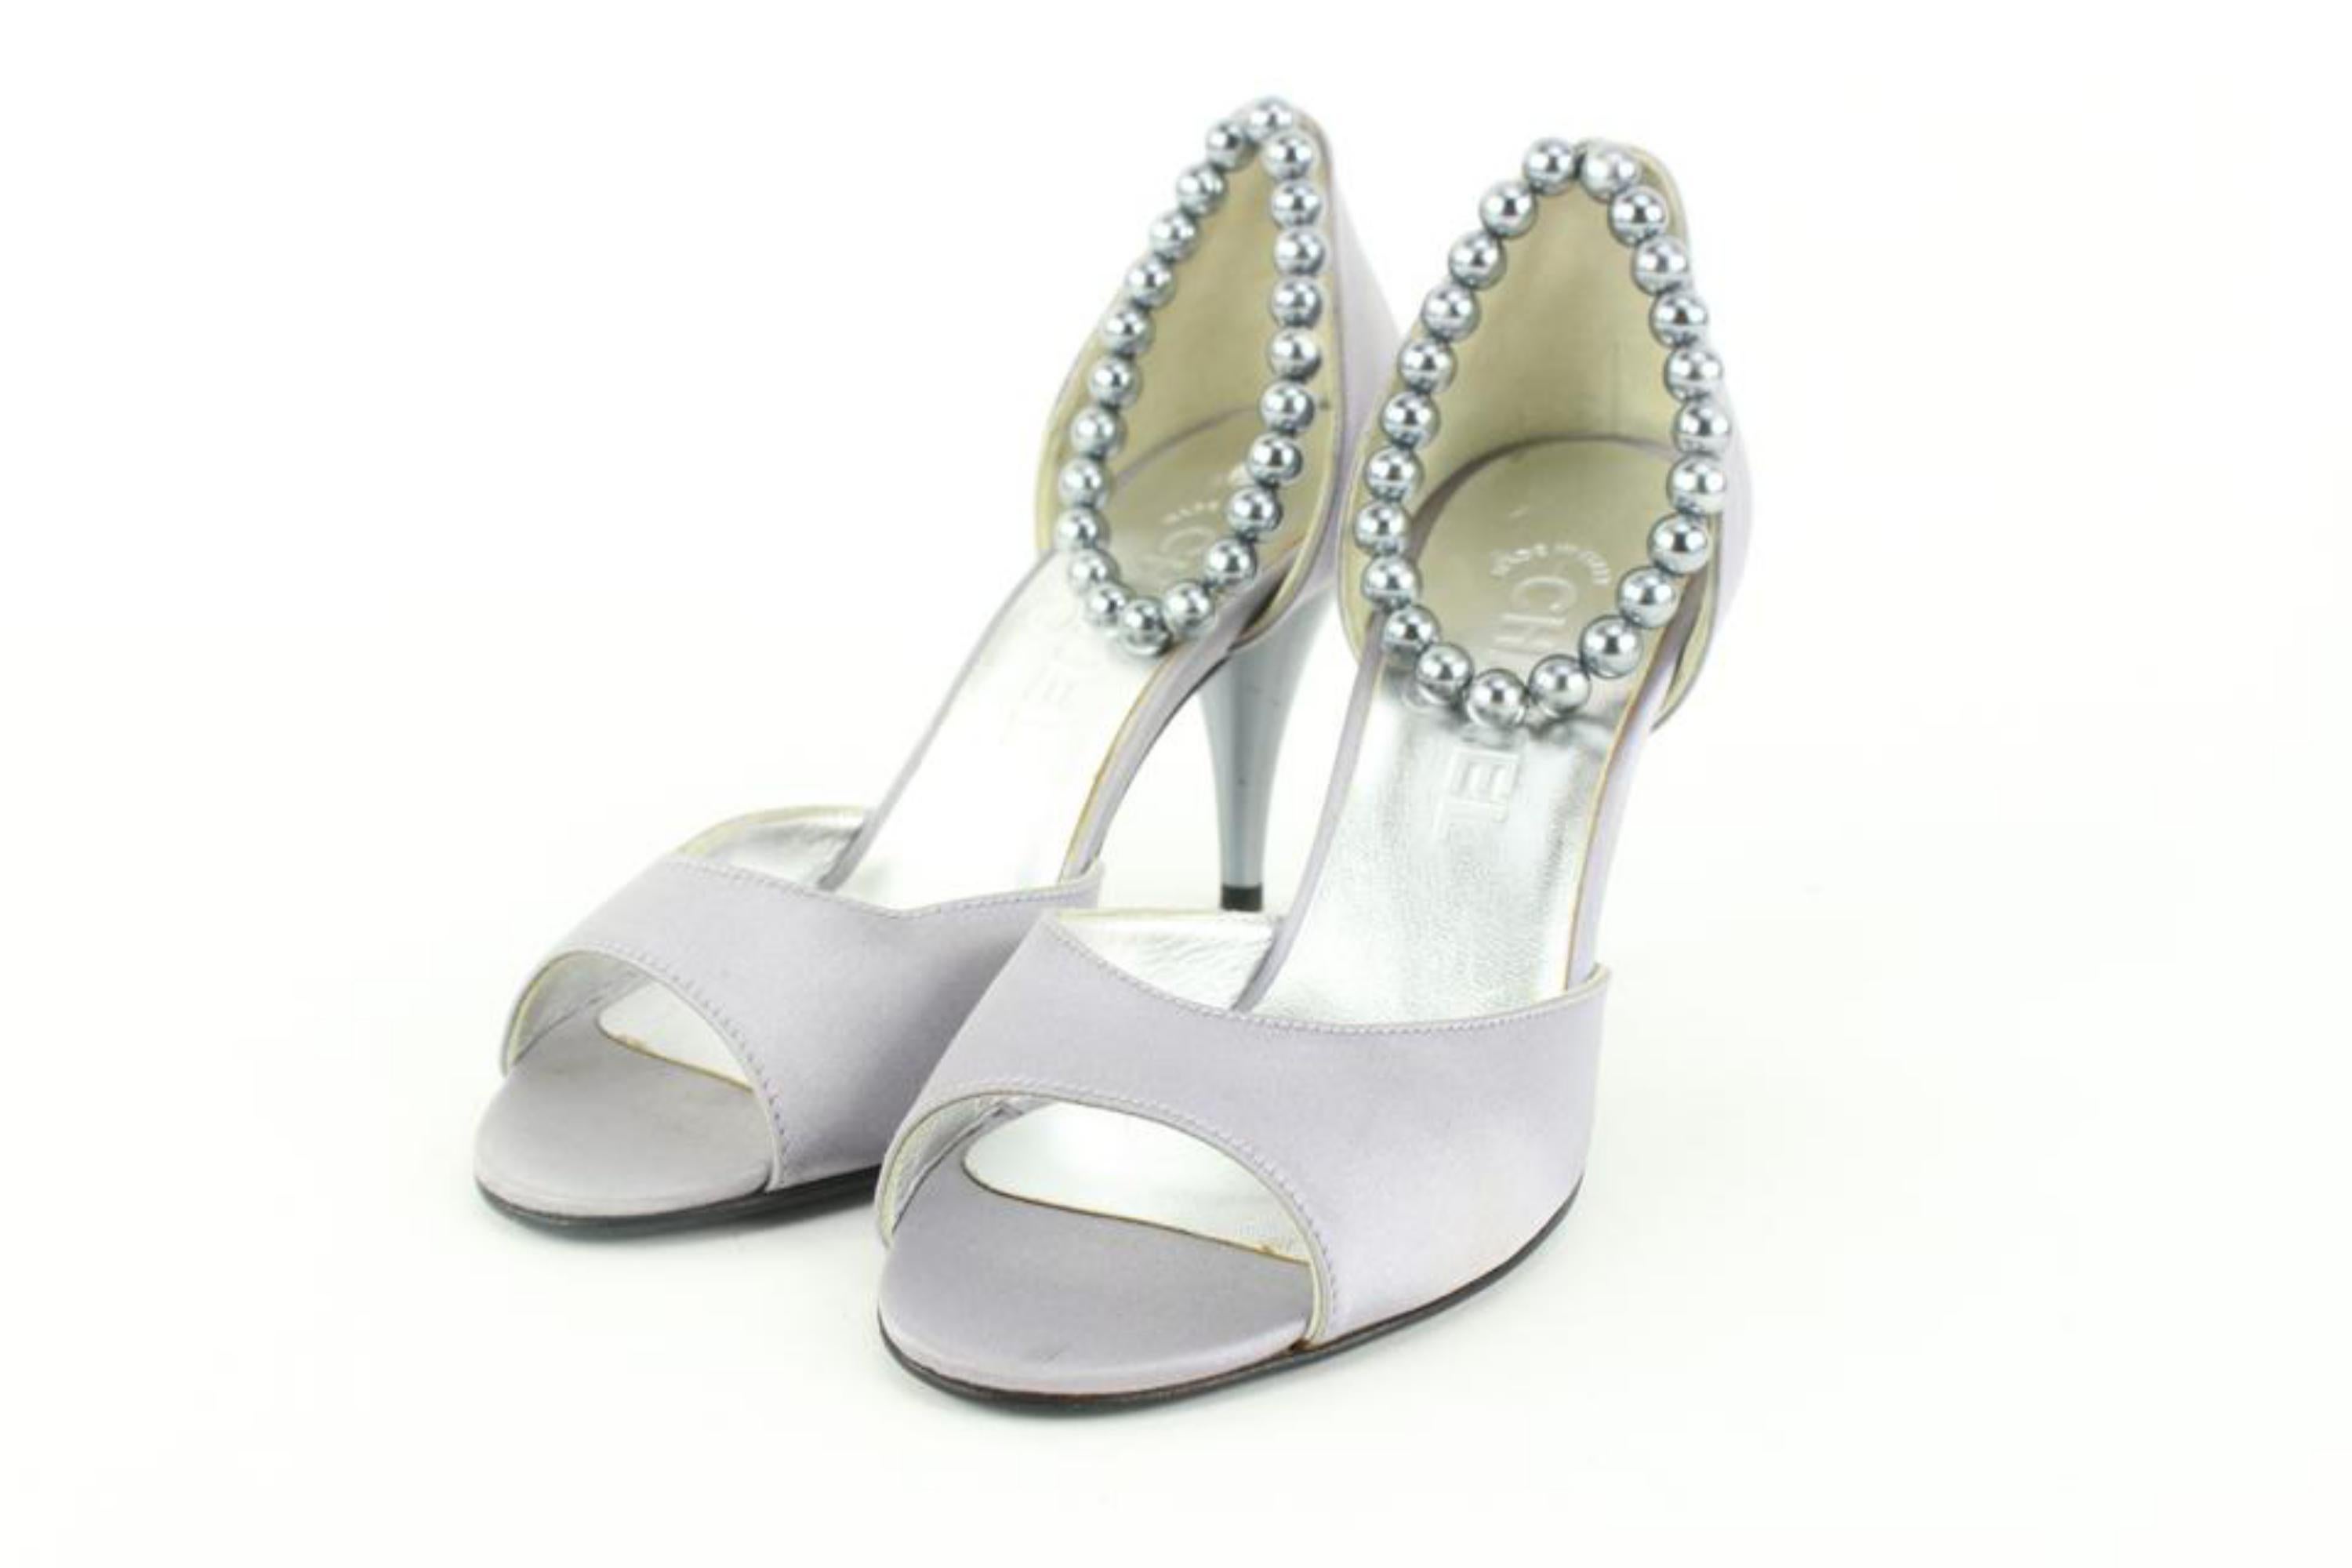 Chanel Size 36.5 Grey Satin Peep Toe Pearl Ankle Strap Pumps Size 13c48 For Sale 4